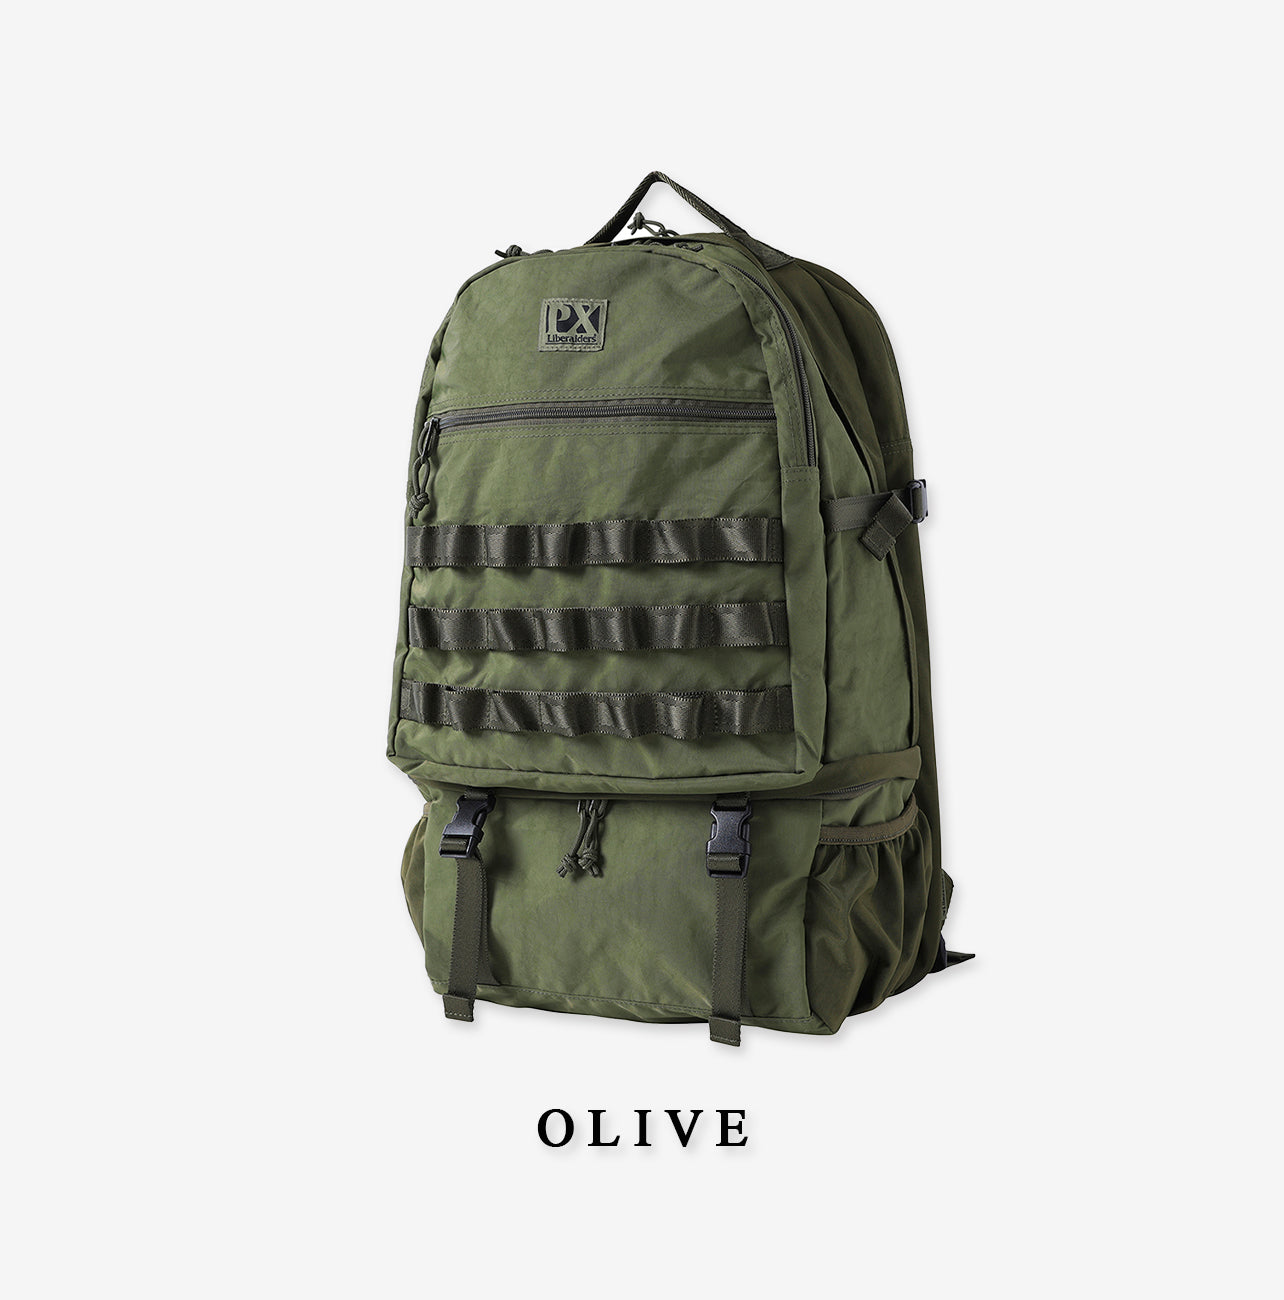 Liberaiders / PX TRAVERSE BACKPACK